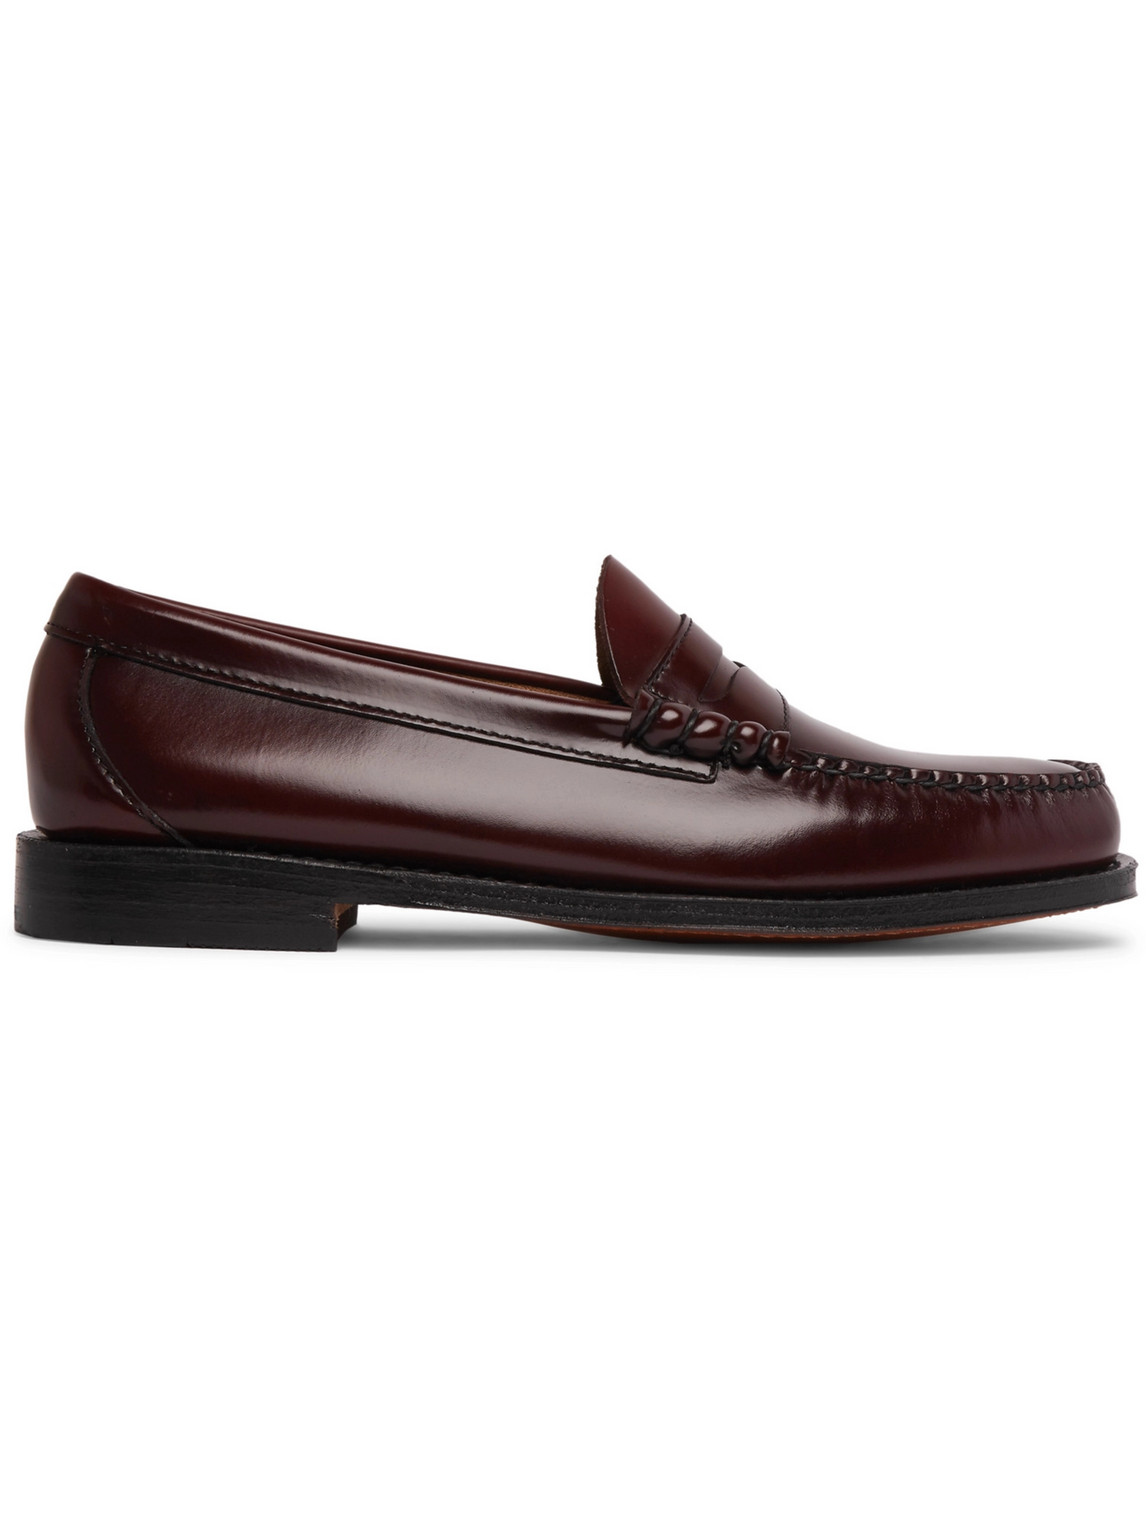 G.H. Bass & Co. - Weejuns Heritage Larson Leather Penny Loafers - Men - Burgundy - UK 10.5 von G.H. Bass & Co.